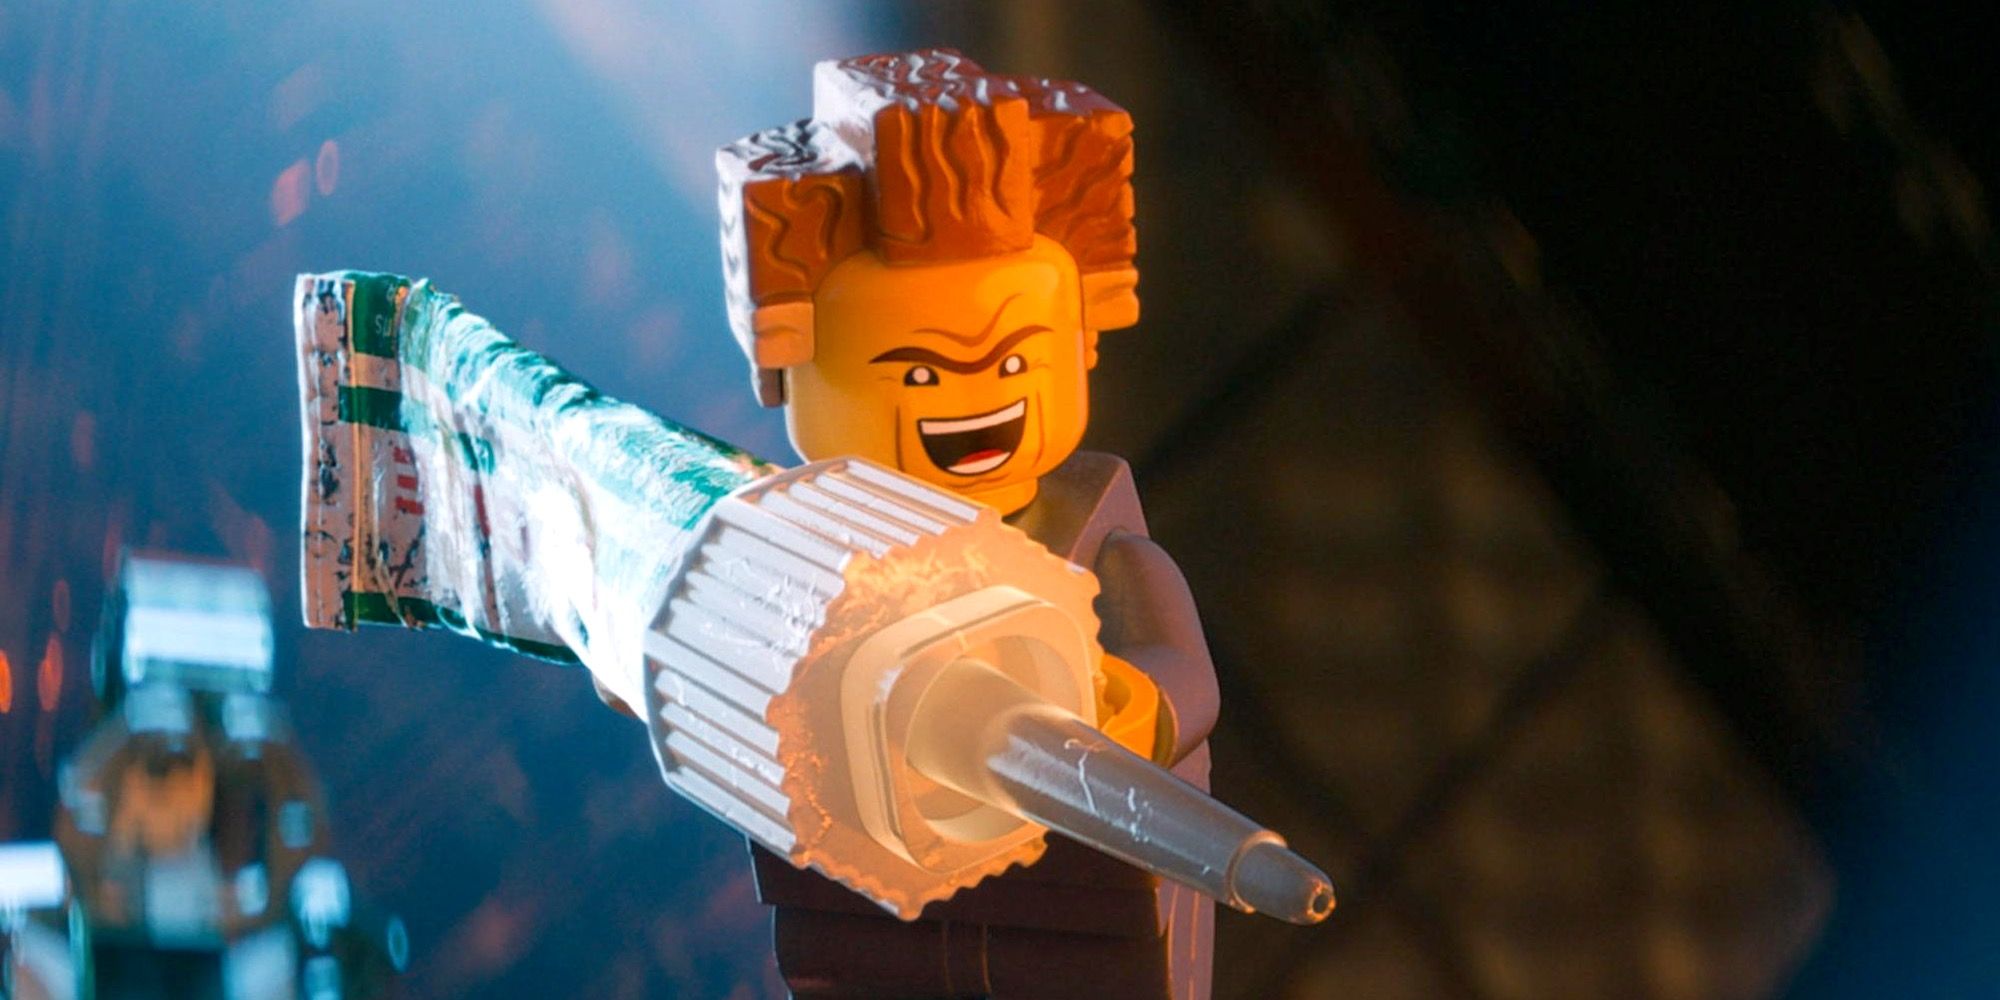 President Business with super glue in The LEGO Movie